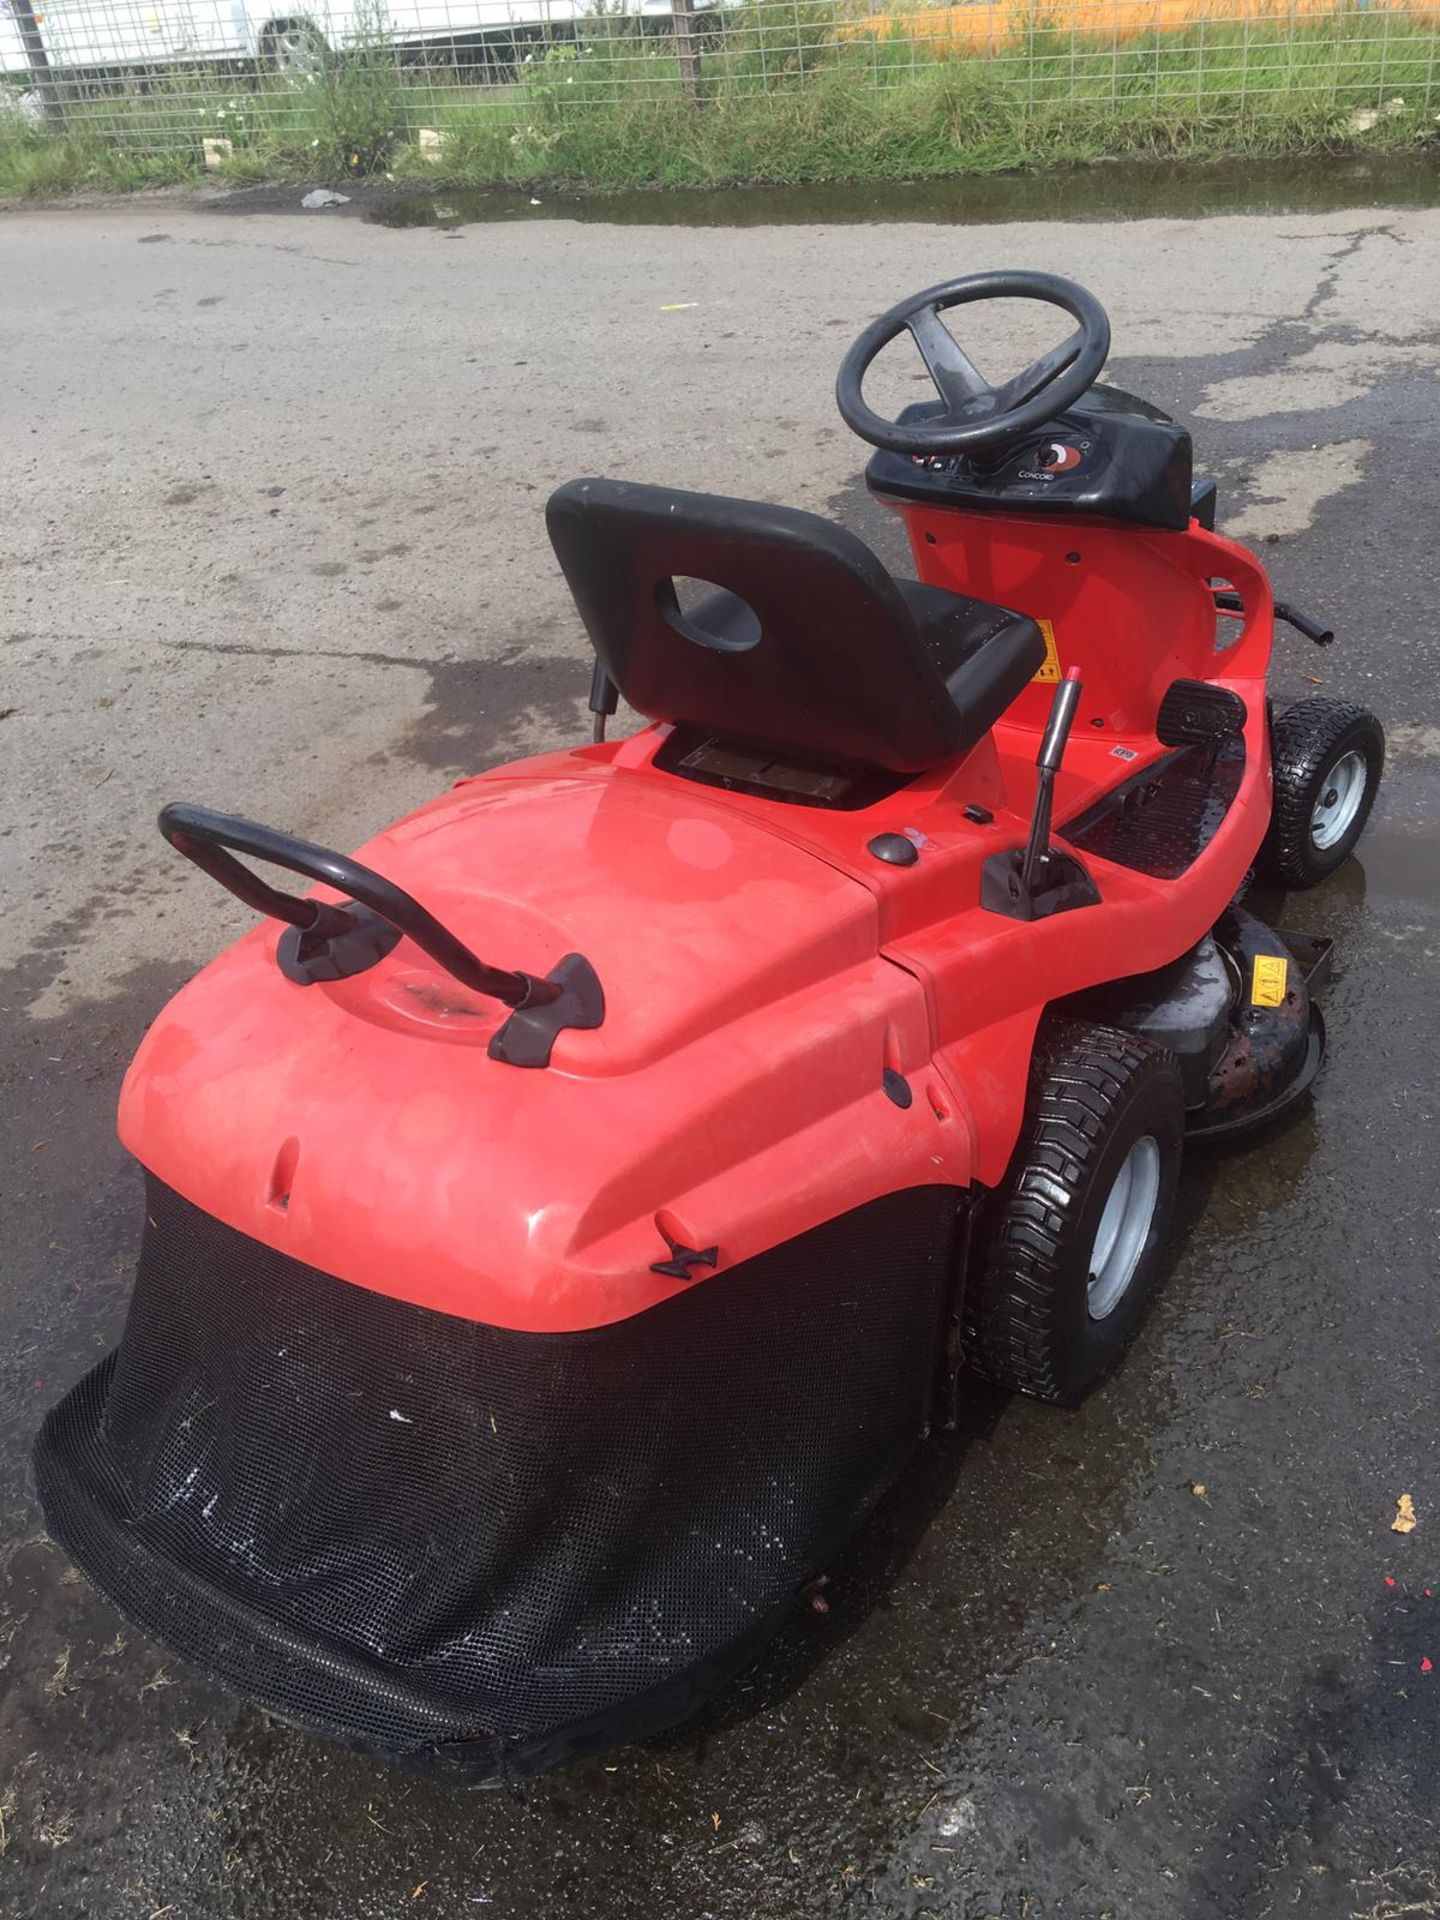 AL-KO T15-102 HD RIDE ON LAWN MOWER, 225 KG, YEAR 2002, C/W REAR GRASS COLLECTOR, 11.5HP I/C ENGINE - Image 5 of 11